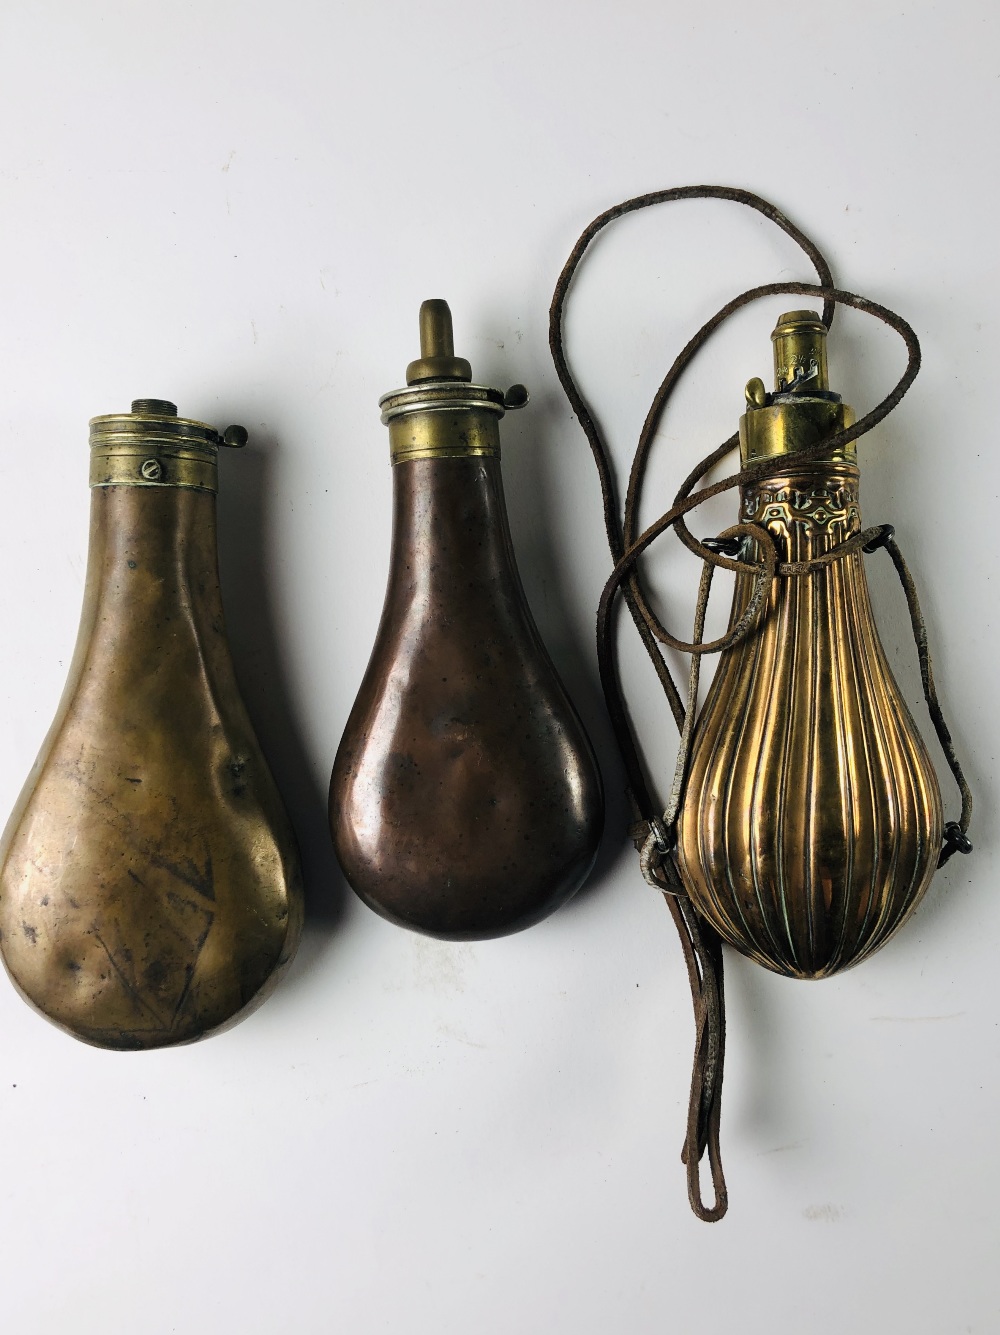 Three antique copper Powder Flasks, two plain and one engraved.